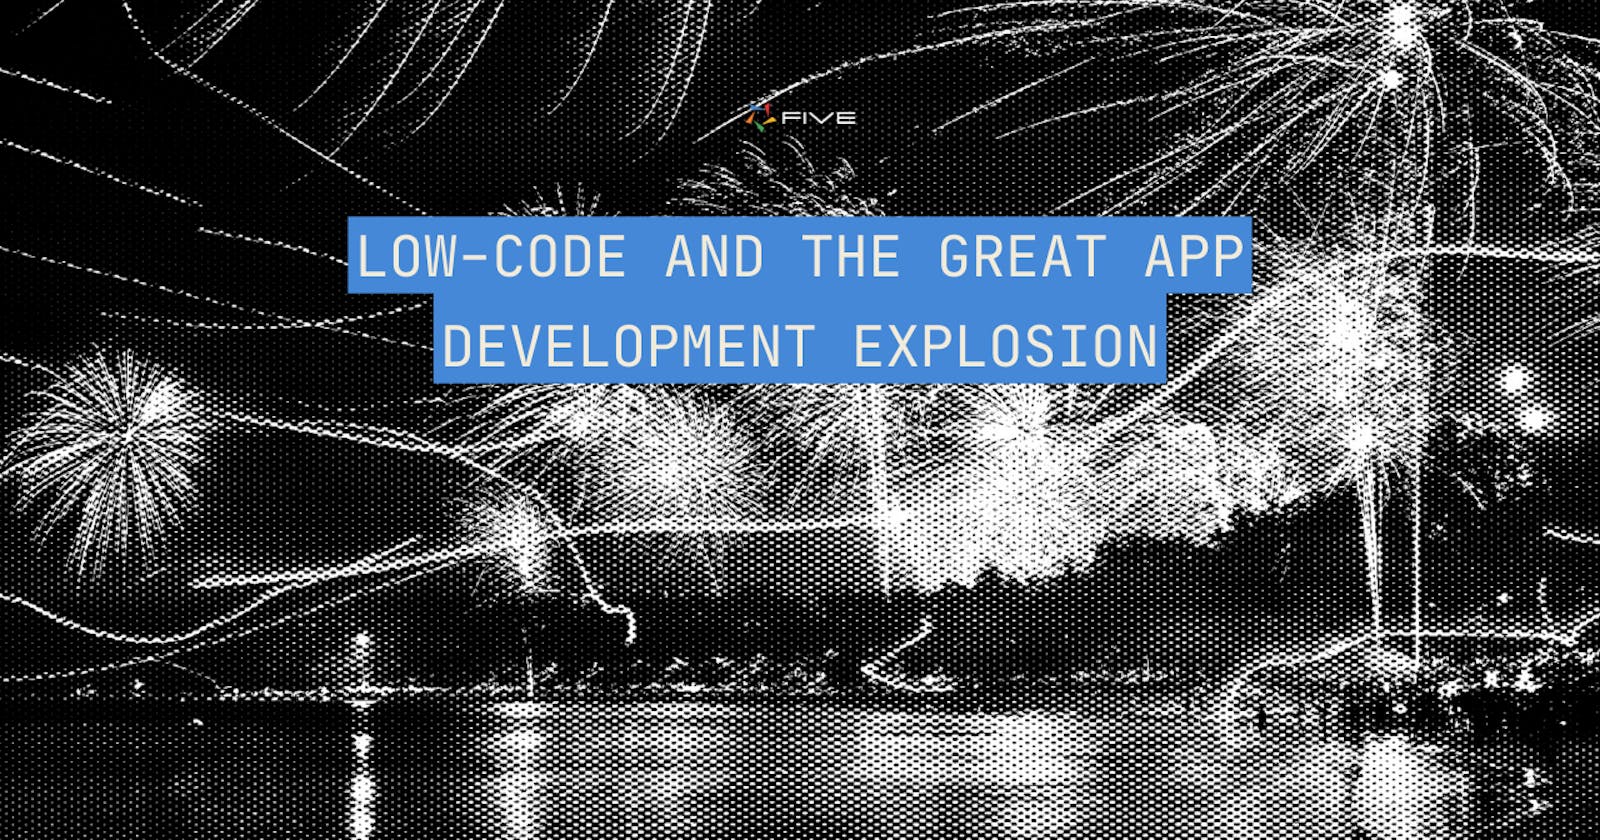 Low-Code And The Great App Development Explosion